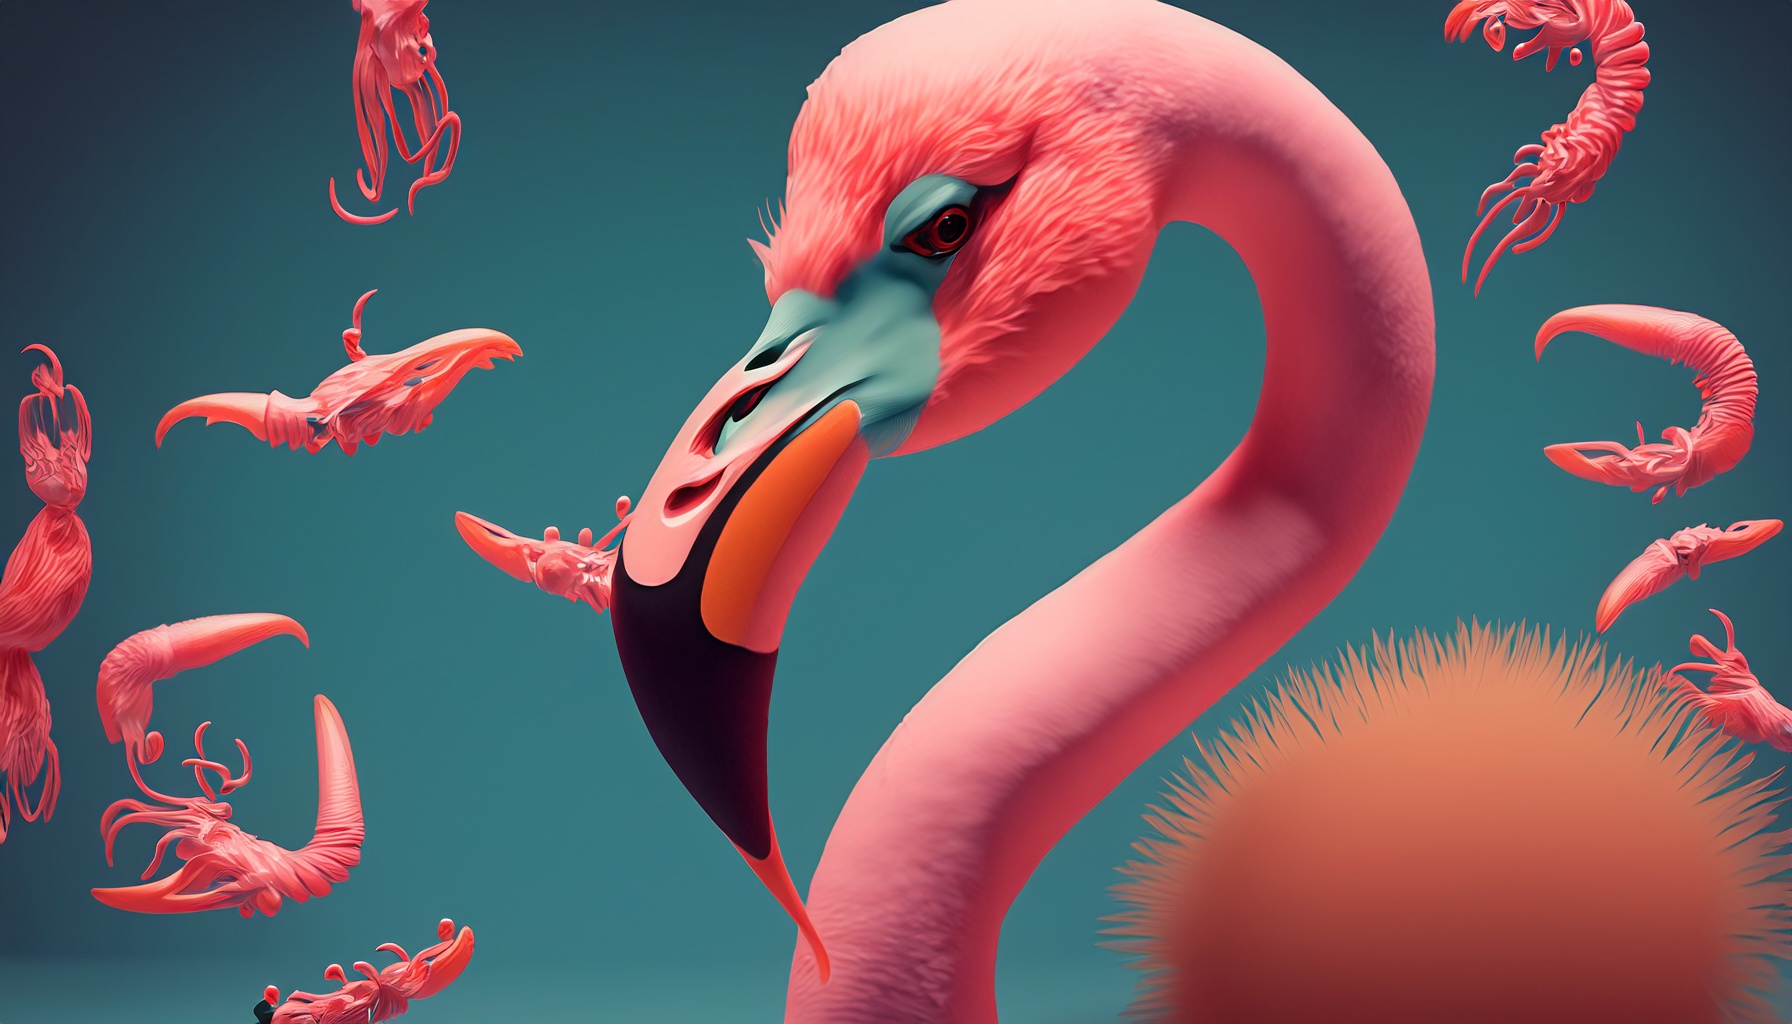 The color of a flamingo’s feathers depends on its diet